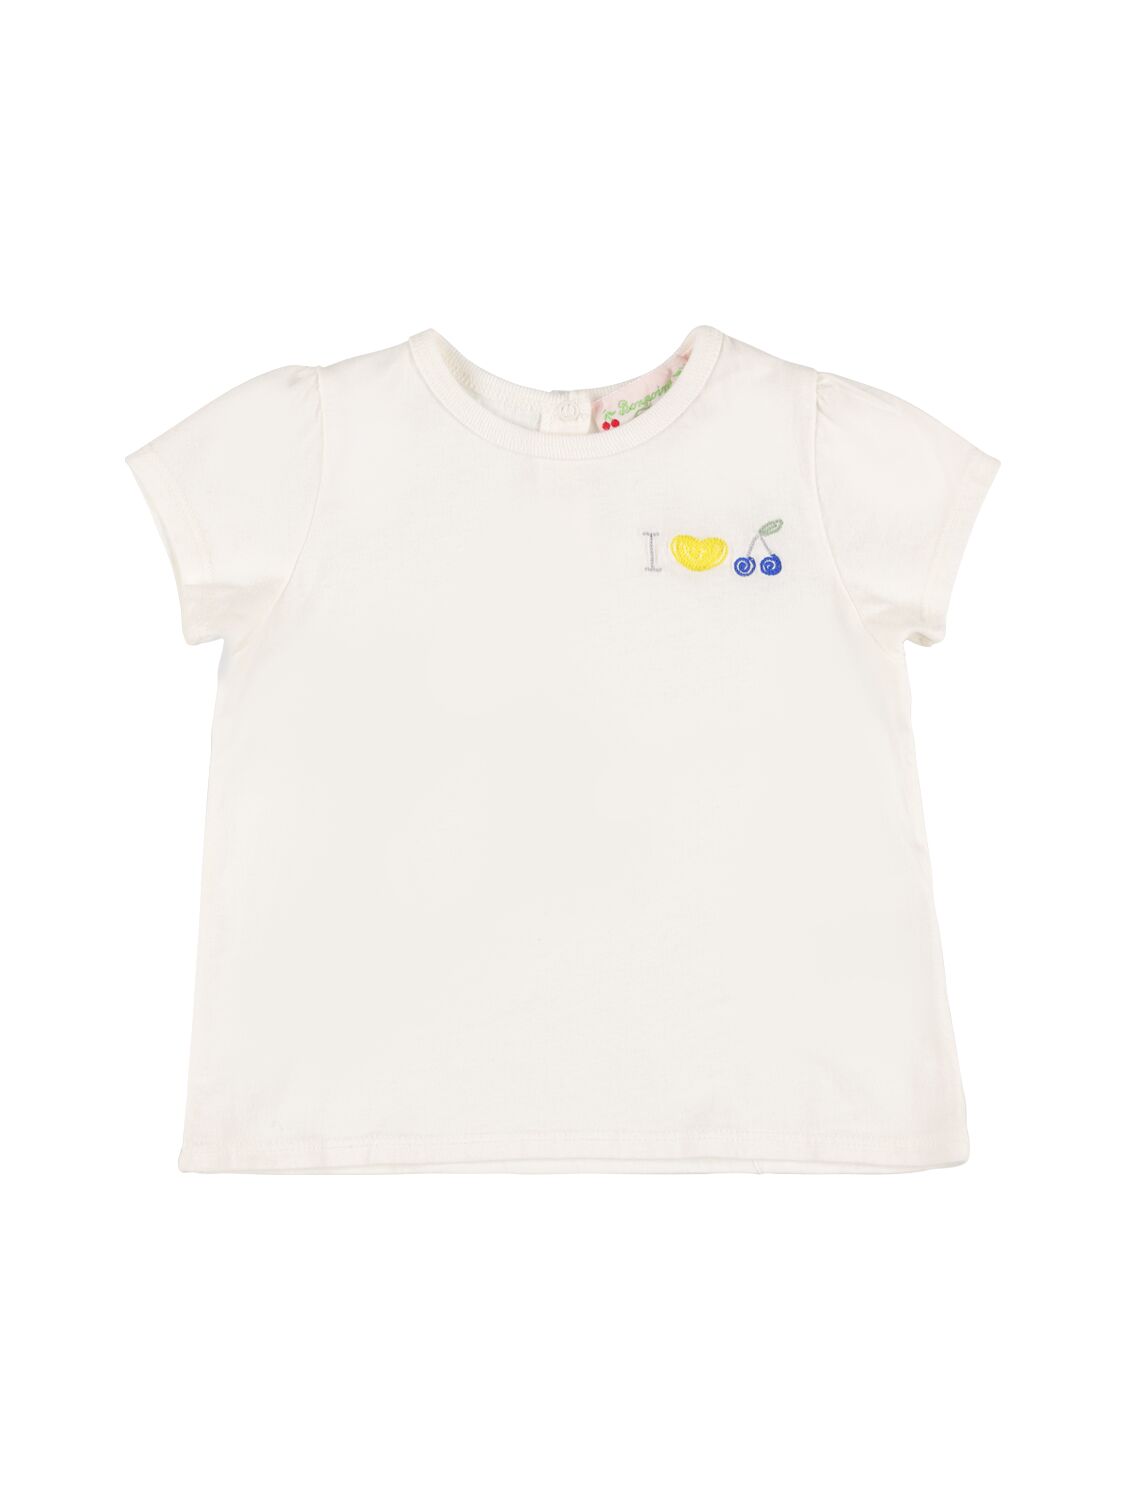 Image of Embroidered Cotton Jersey T-shirt